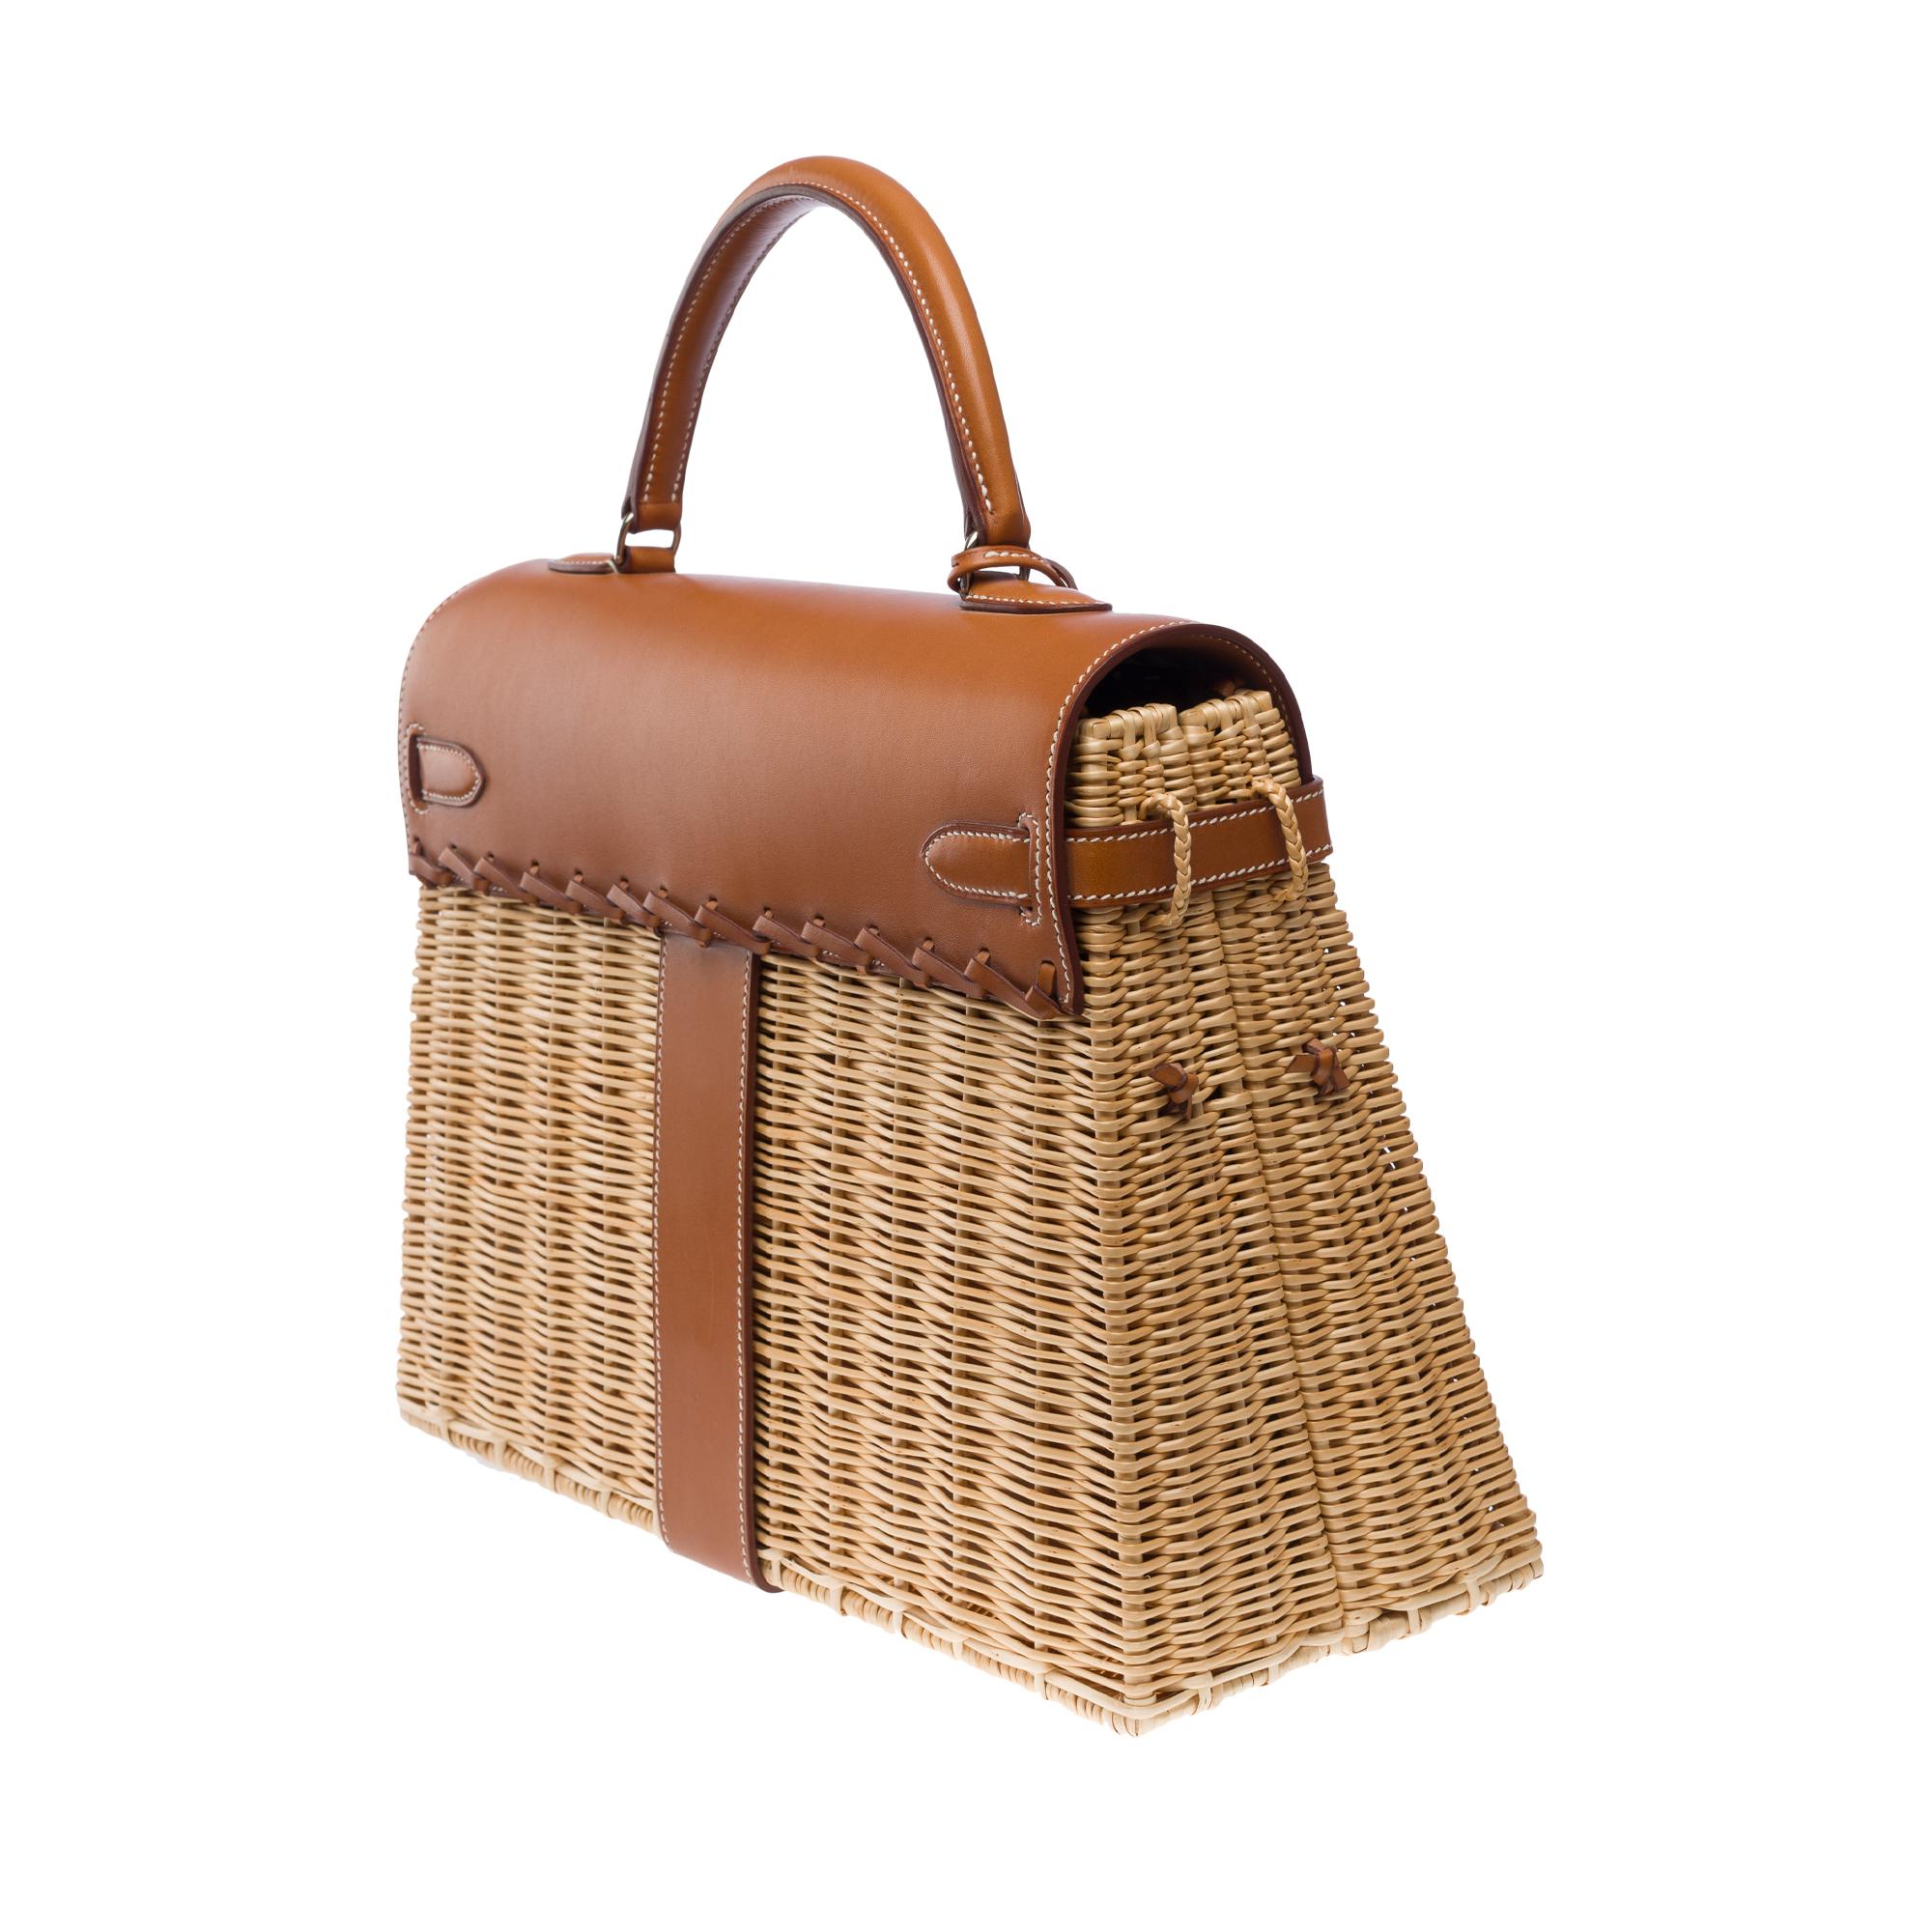 Rare Hermes Kelly 35 Picnic in wicker and barenia leather , SHW For Sale 2